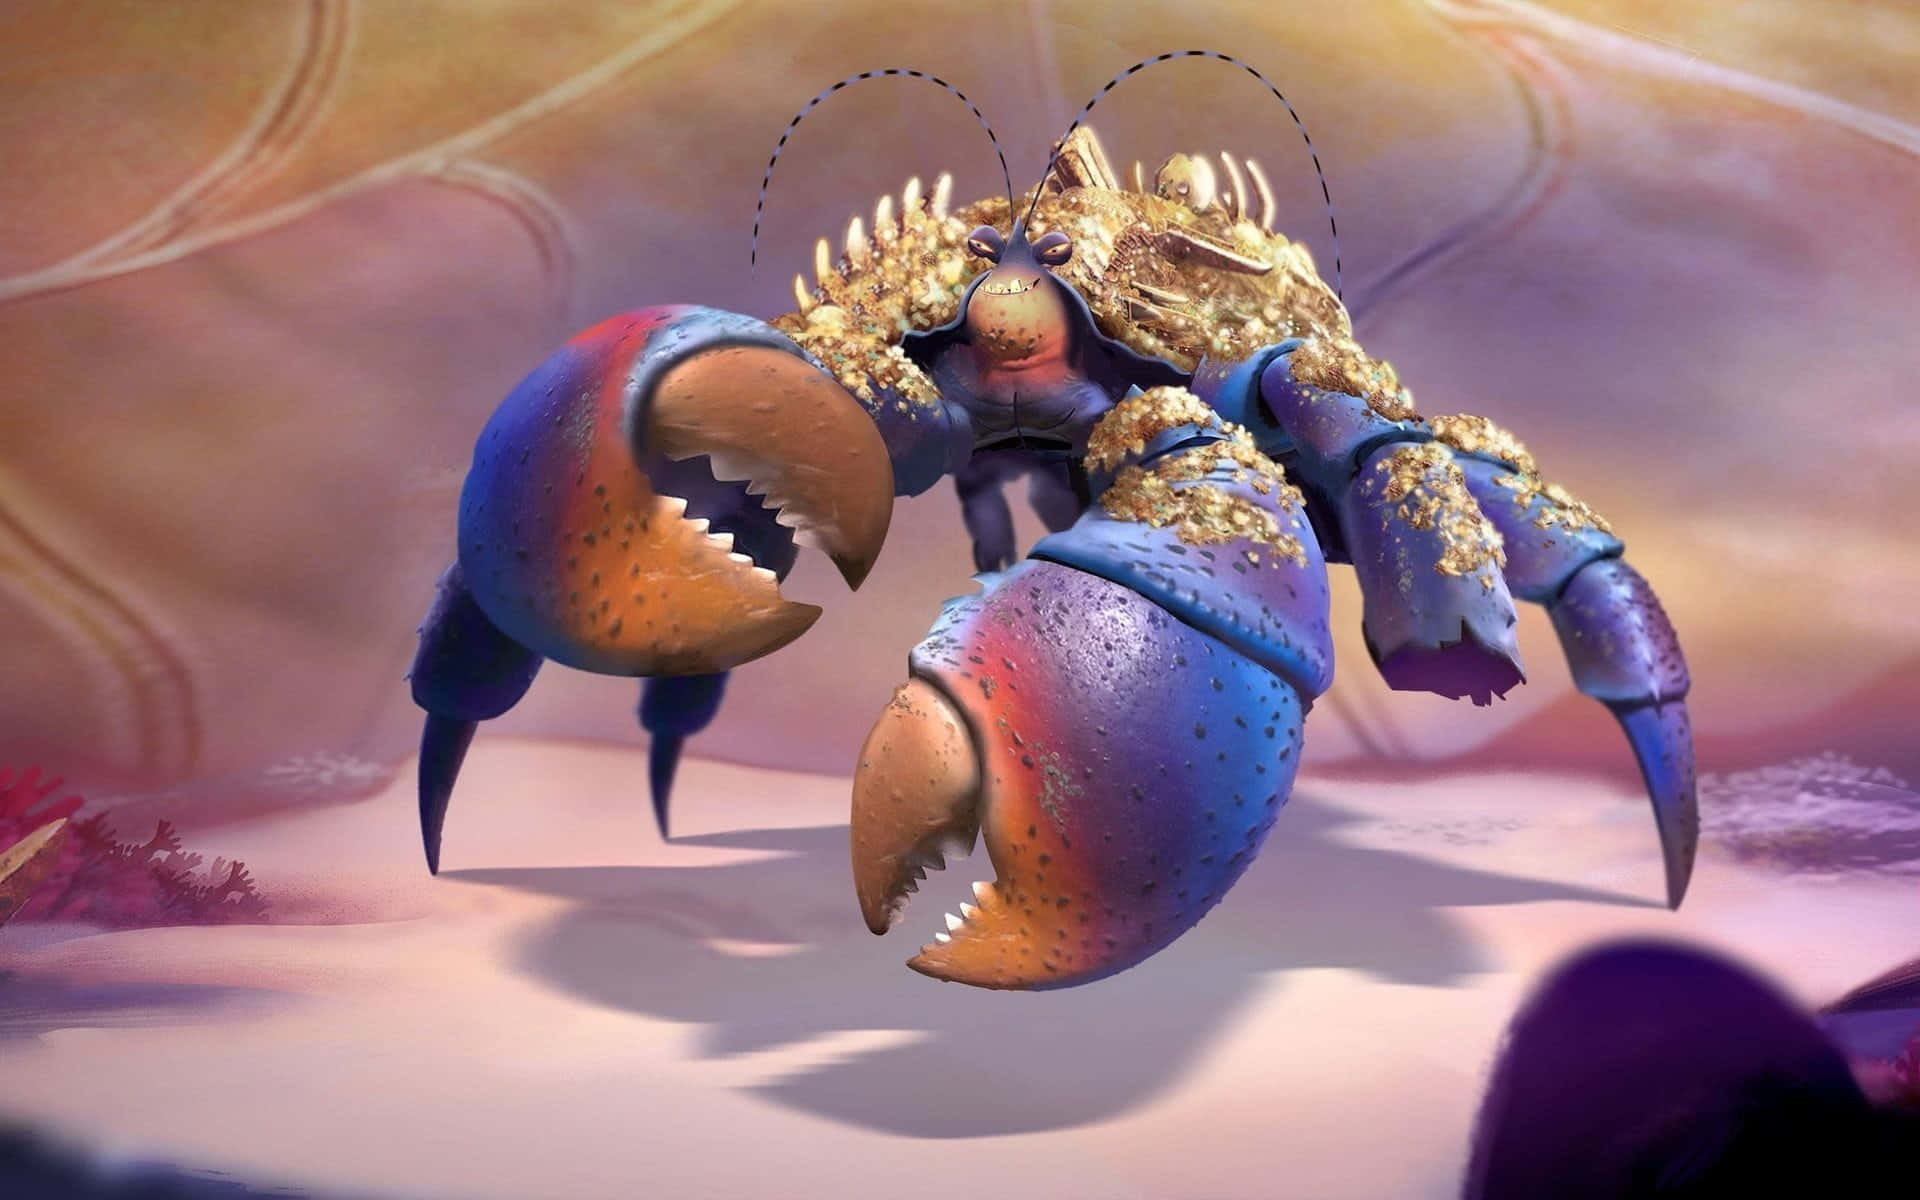 A Large Crab With A Large Head And Large Claws